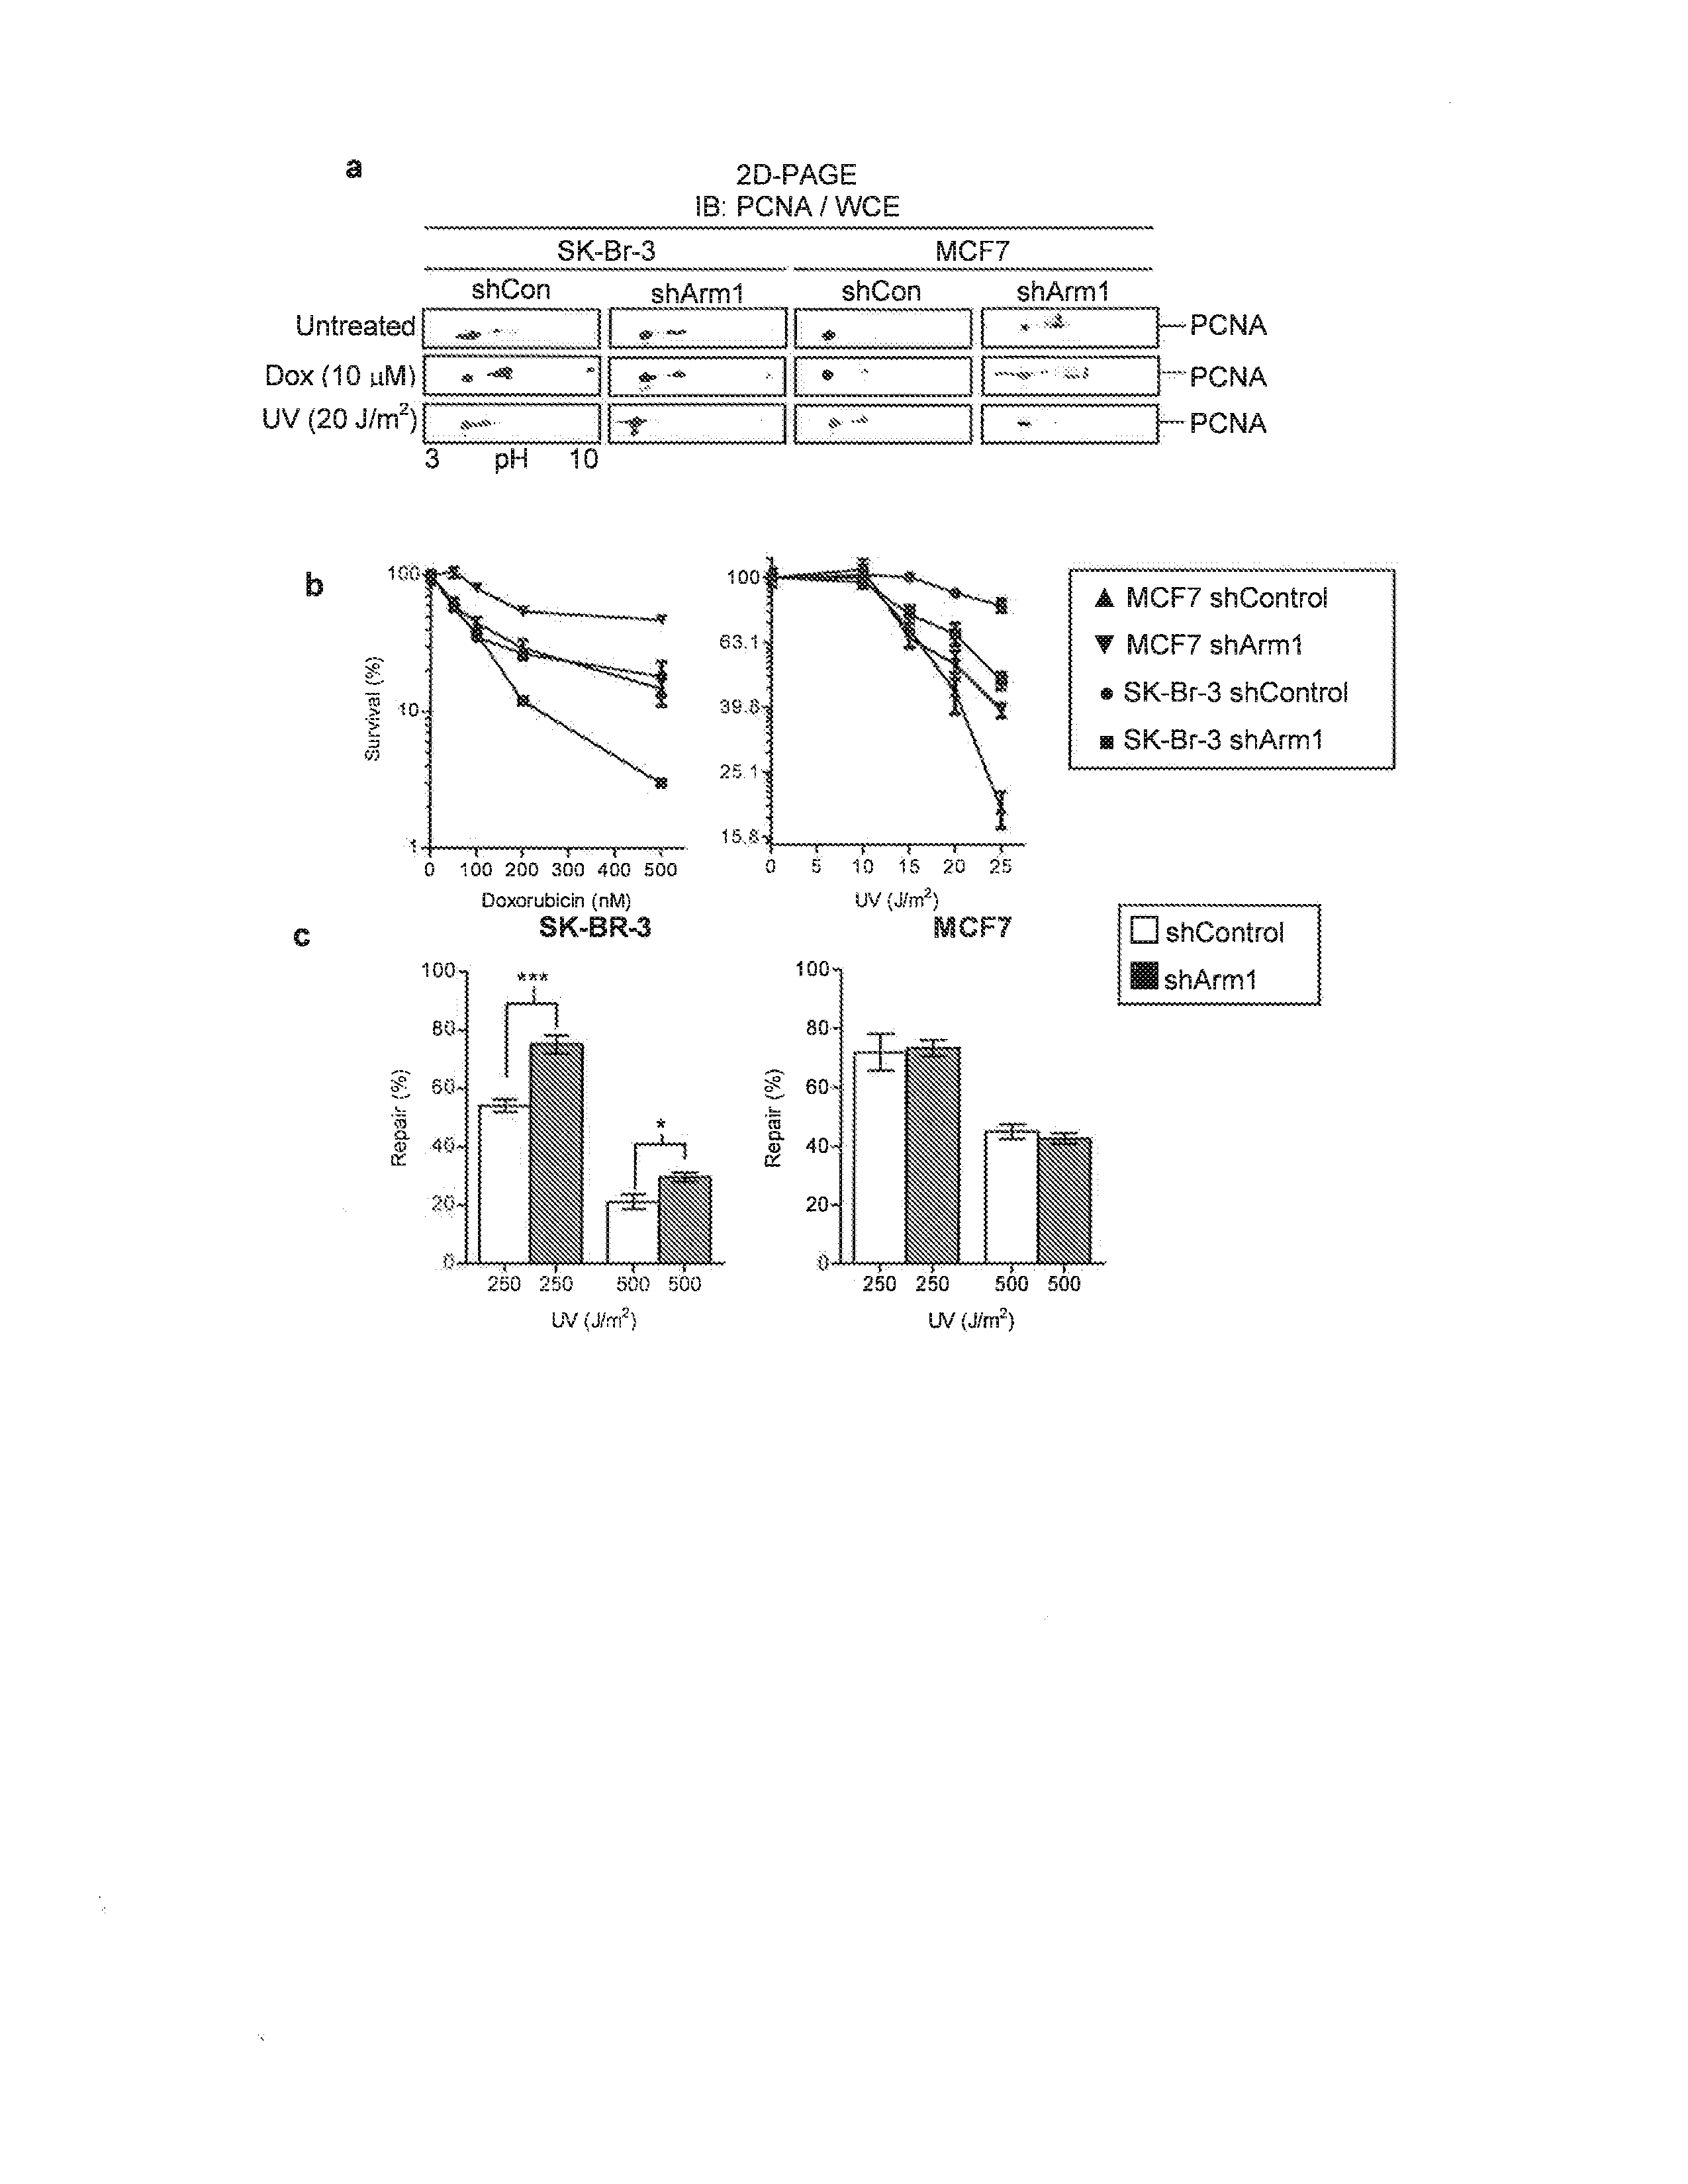 Method for enhancing efficacy and selectivity of cancer cell killing by DNA damaging agents